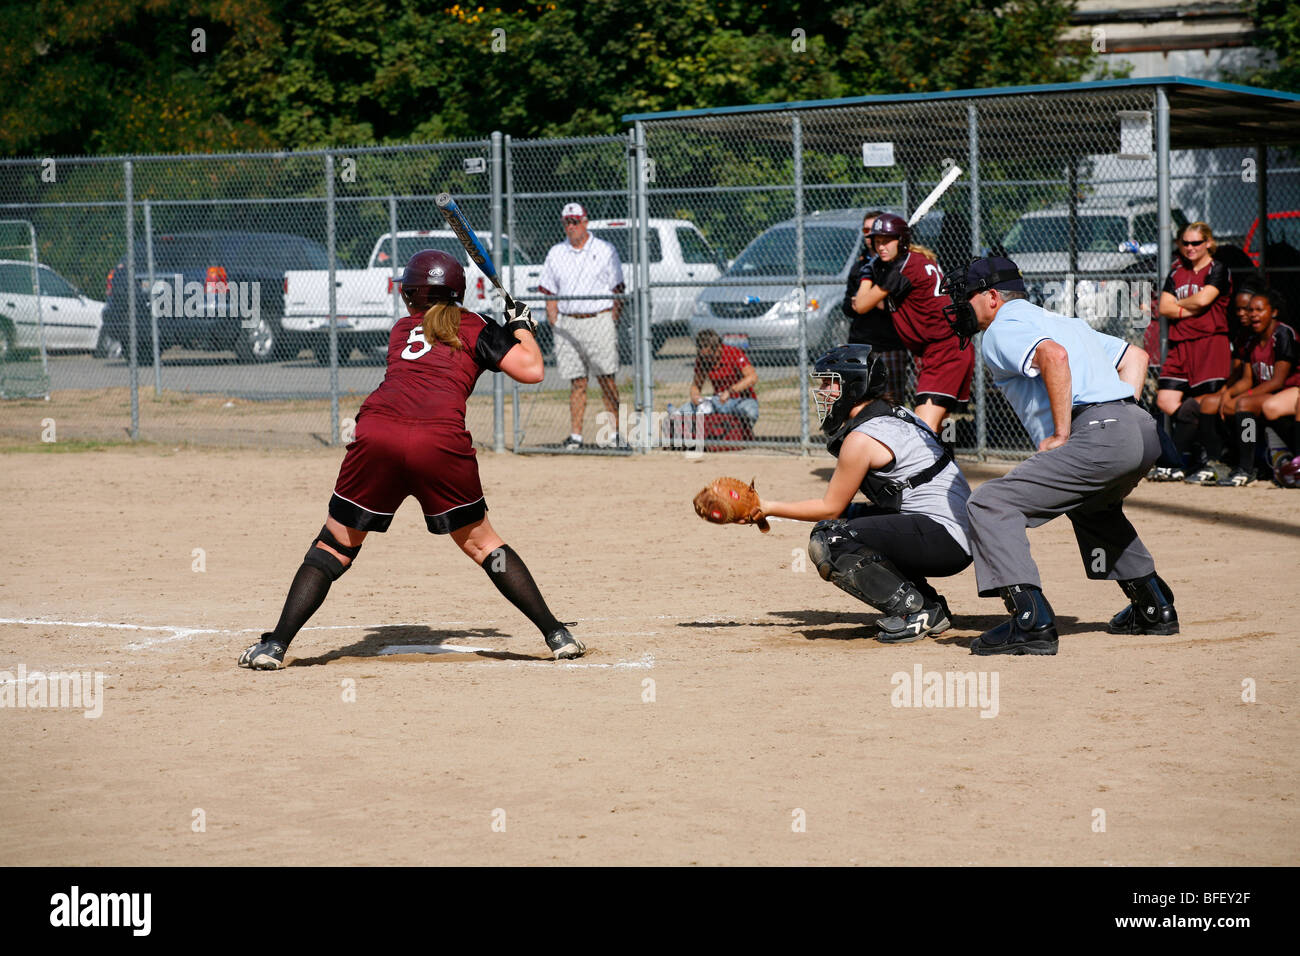 North Idaho College softball game, Sept. 28, 2008, Coeur D Alene, Idaho. Batter just about to swing at the pitch. Stock Photo